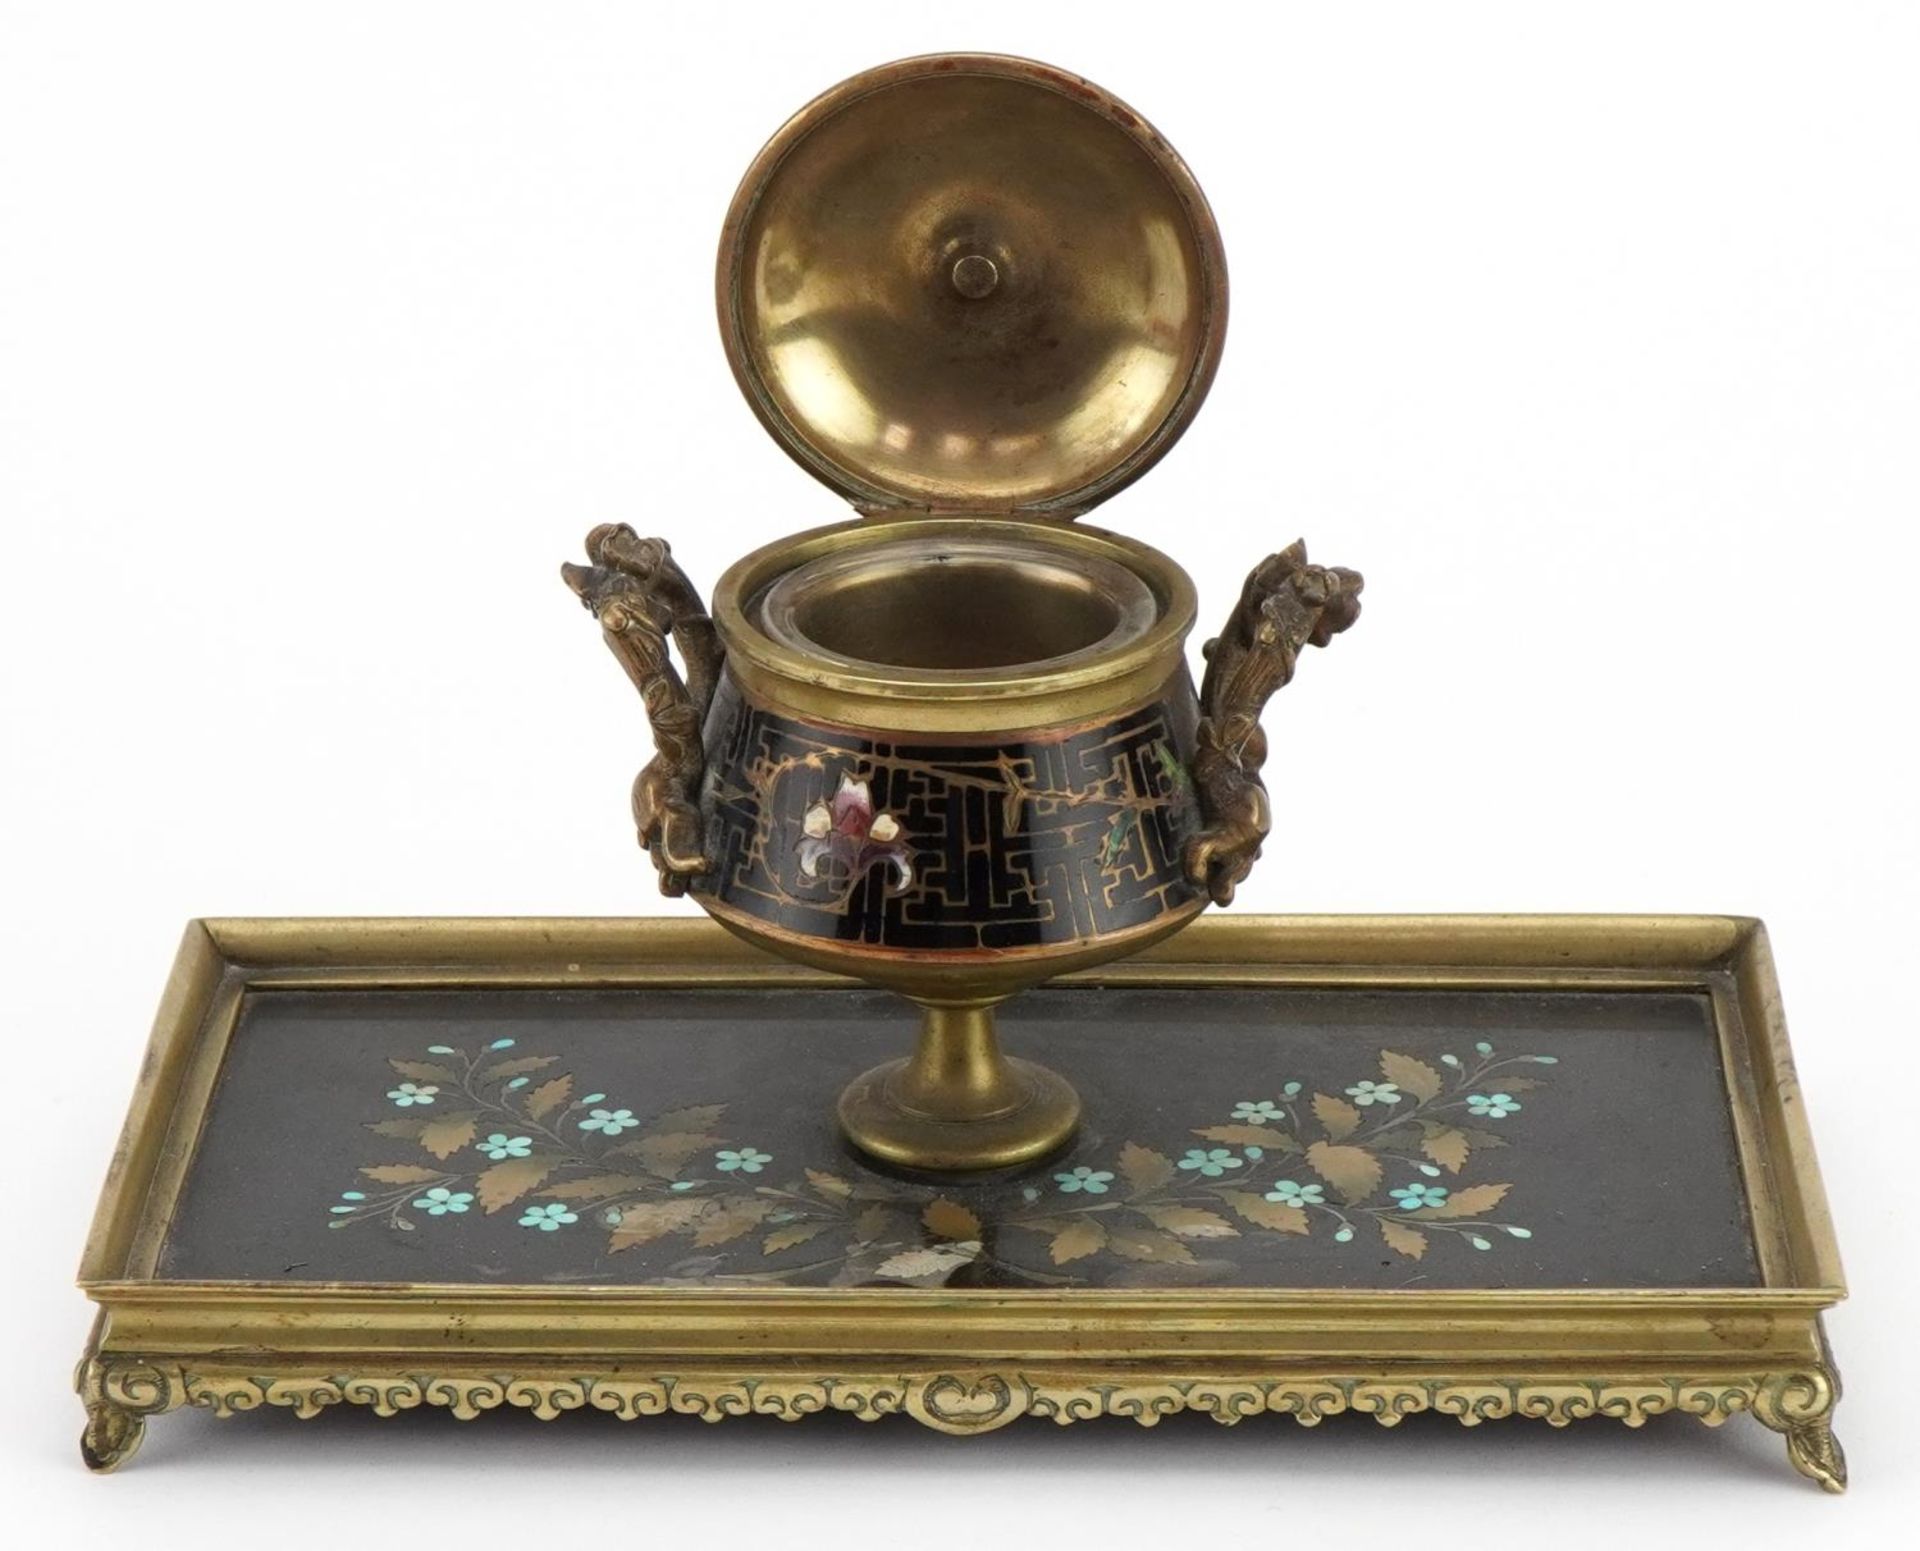 19th century ornate brass pietra dura and cloisonne desk inkwell with glass liner finely inlaid - Image 3 of 8